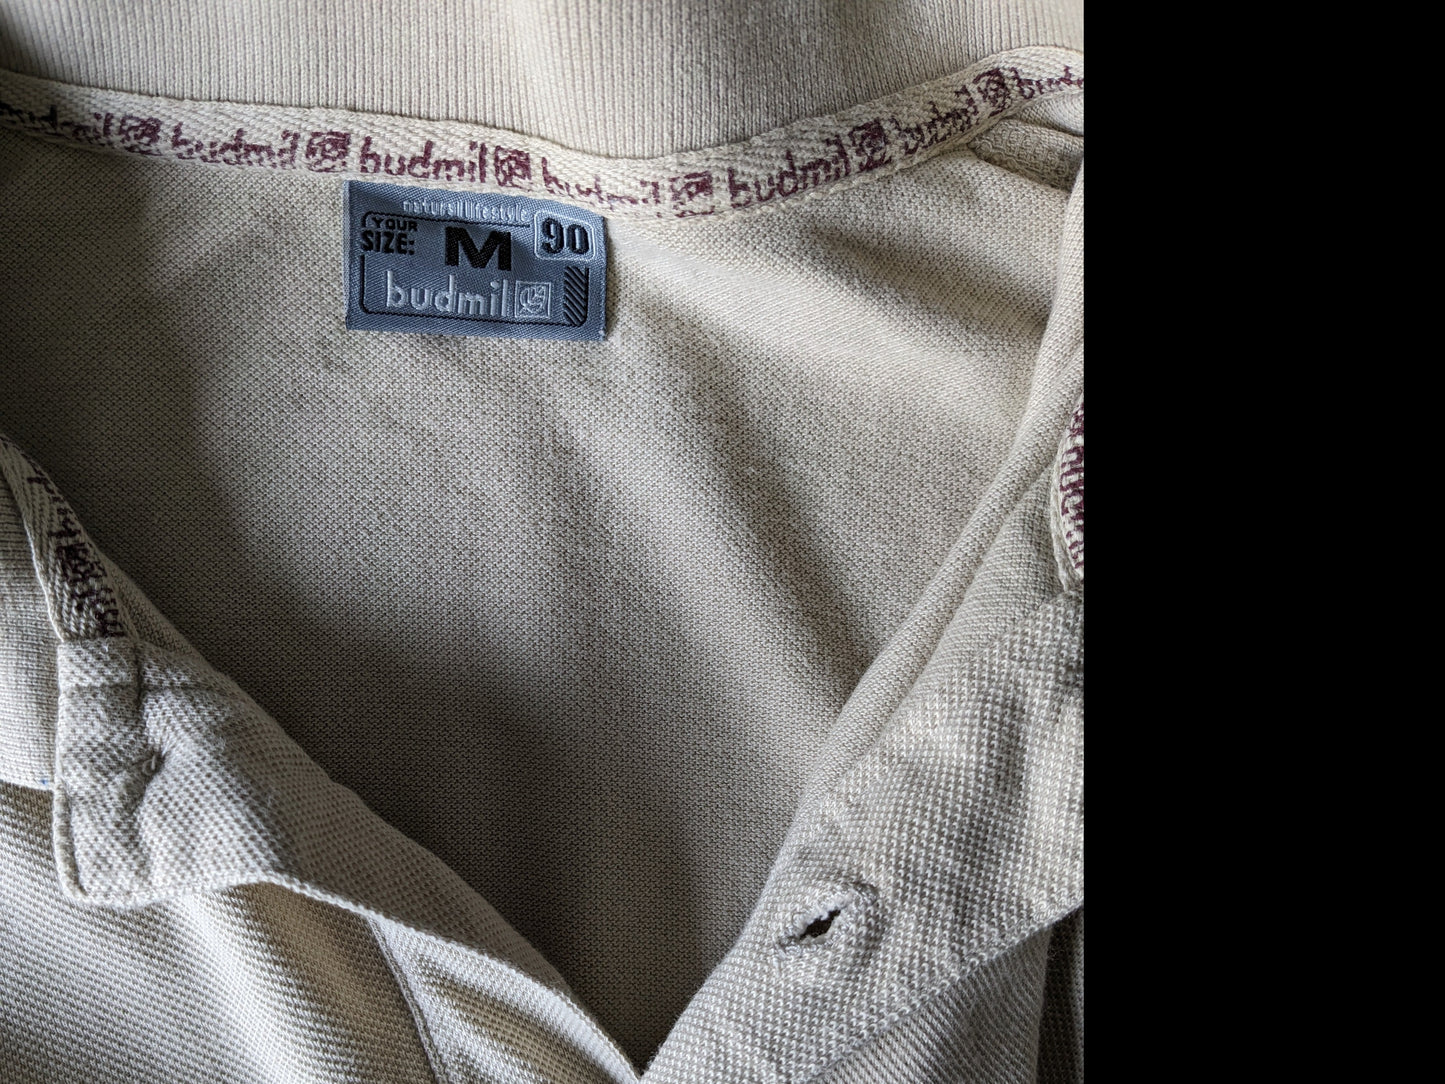 Vintage Budmil Polo. Beige colored. Size M.